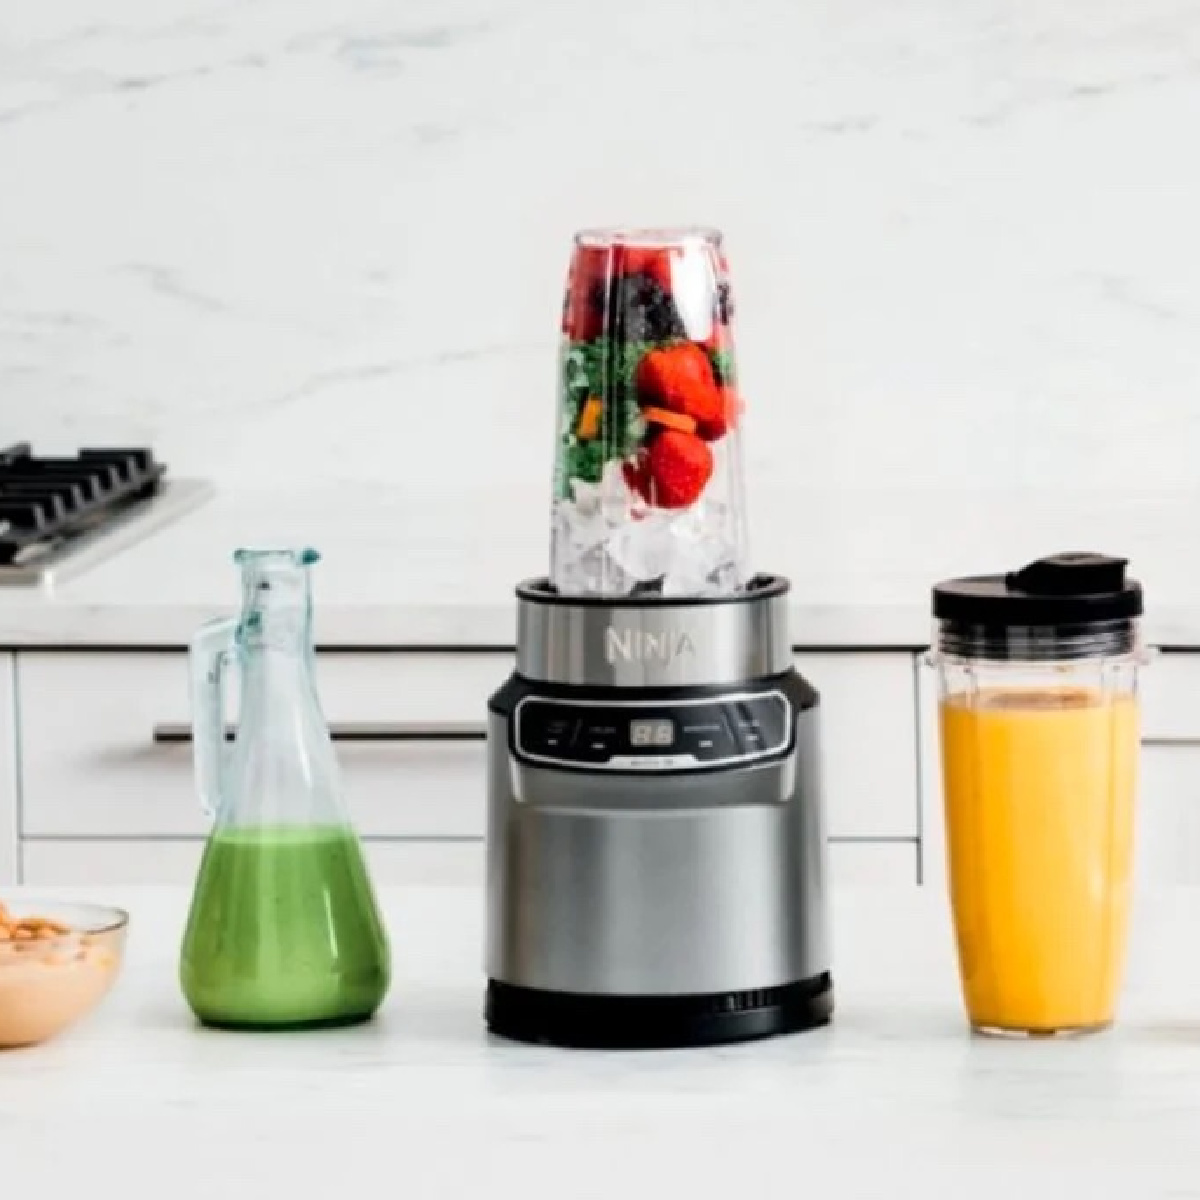 Enter For A Chance To Win NutriBullet Pro 900 Mixer Blender worth